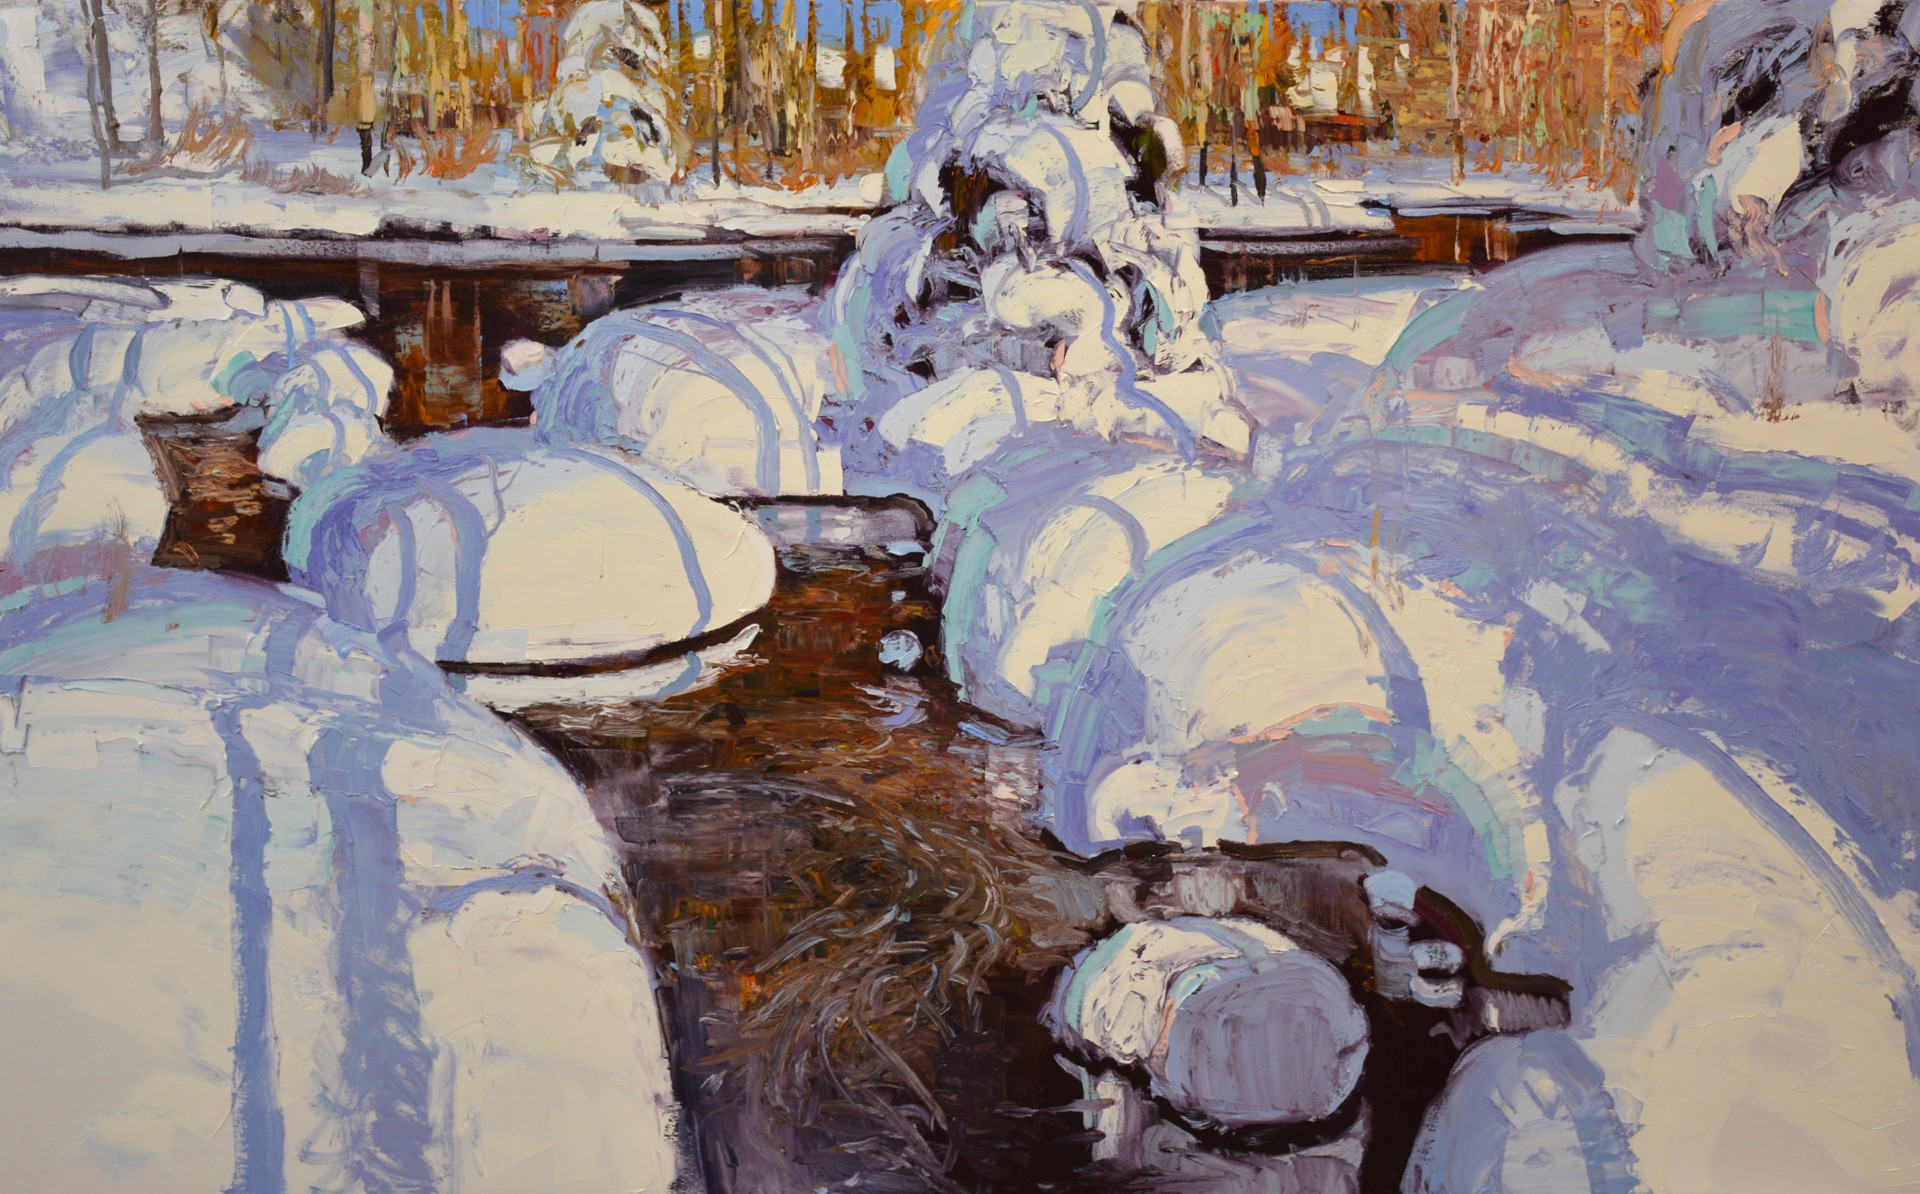 An Original Oil Painting Of Pillow Like Snow Along A Creek With Aspens, By Silas Thompson, Available At Gallery Wild